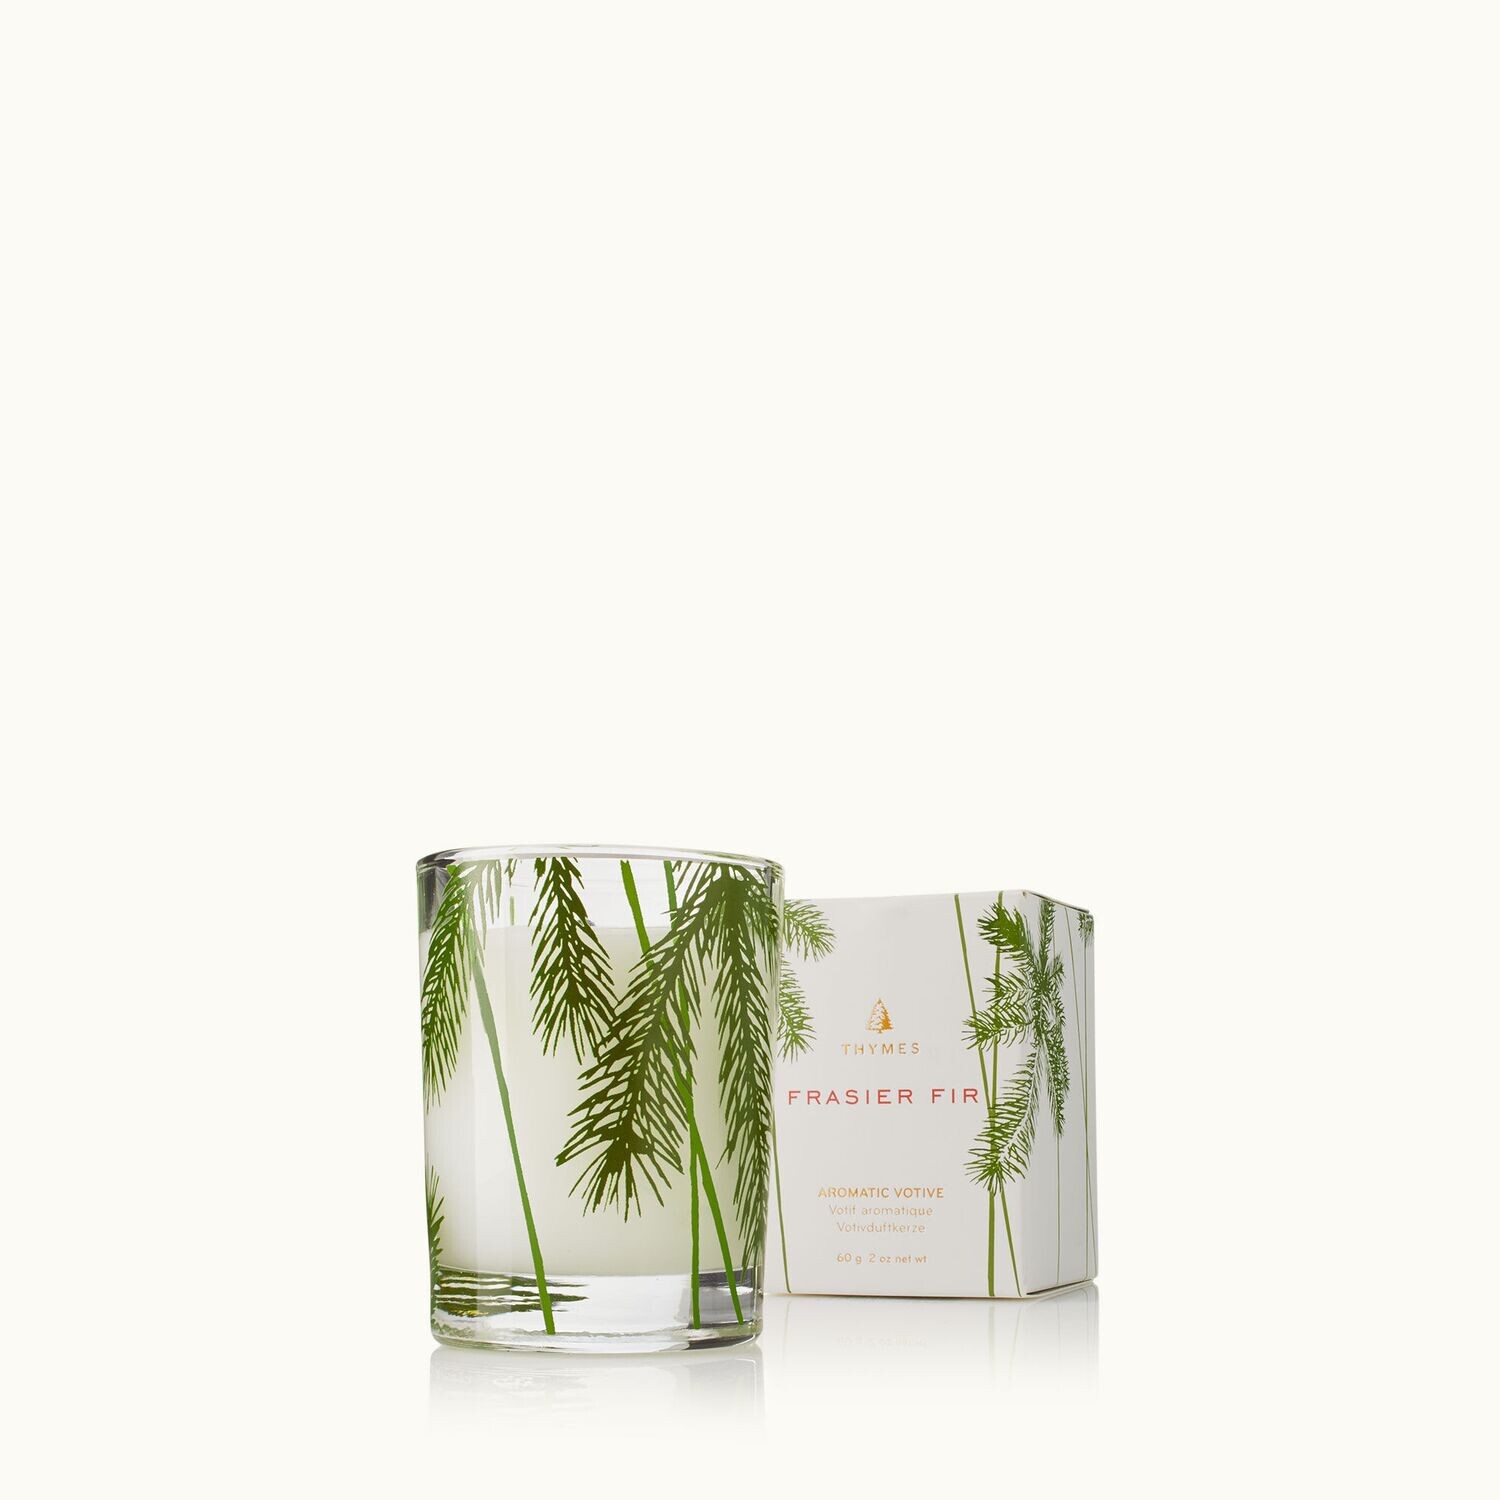 Thymes Frasier Fir Votive Candle Pine Needle